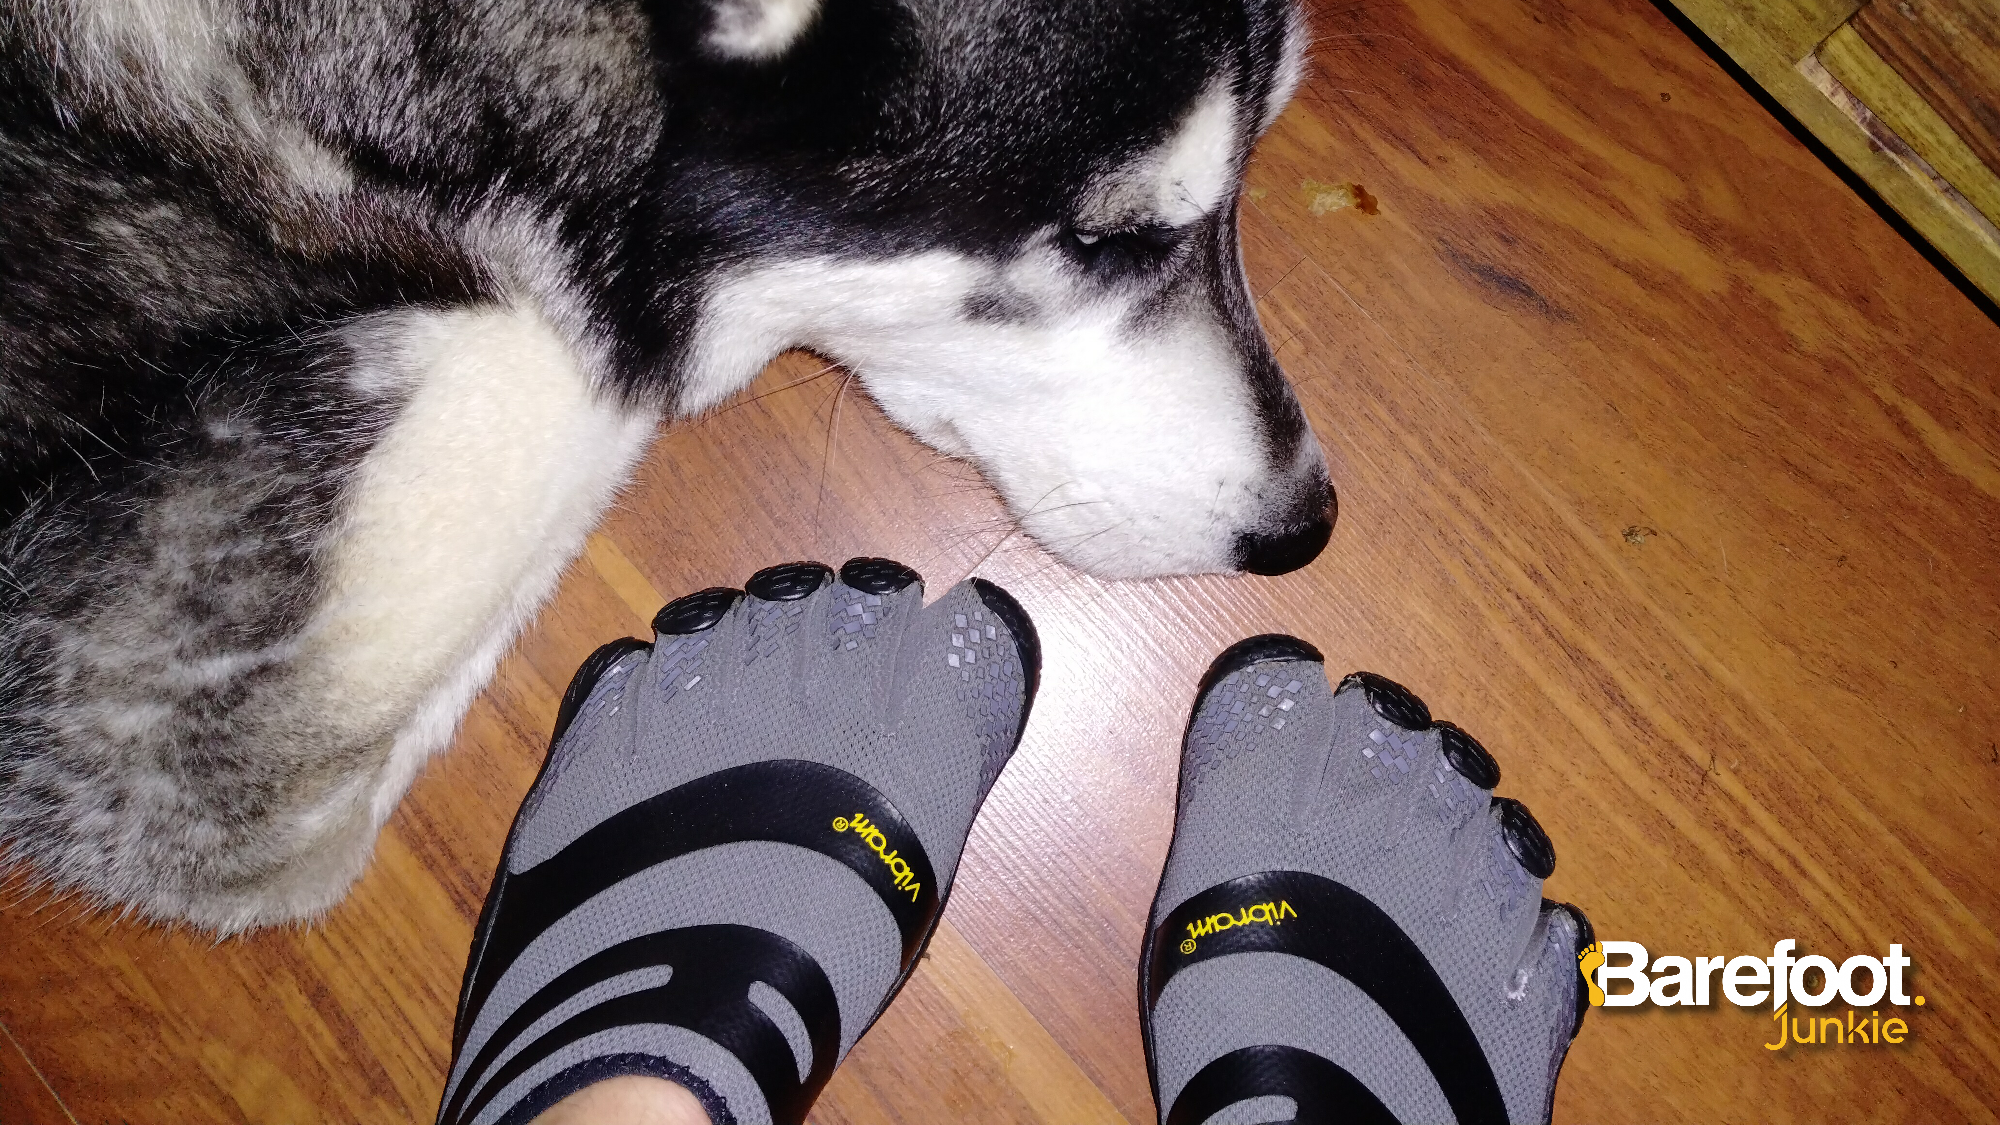 How did you discover Vibram FiveFingers?